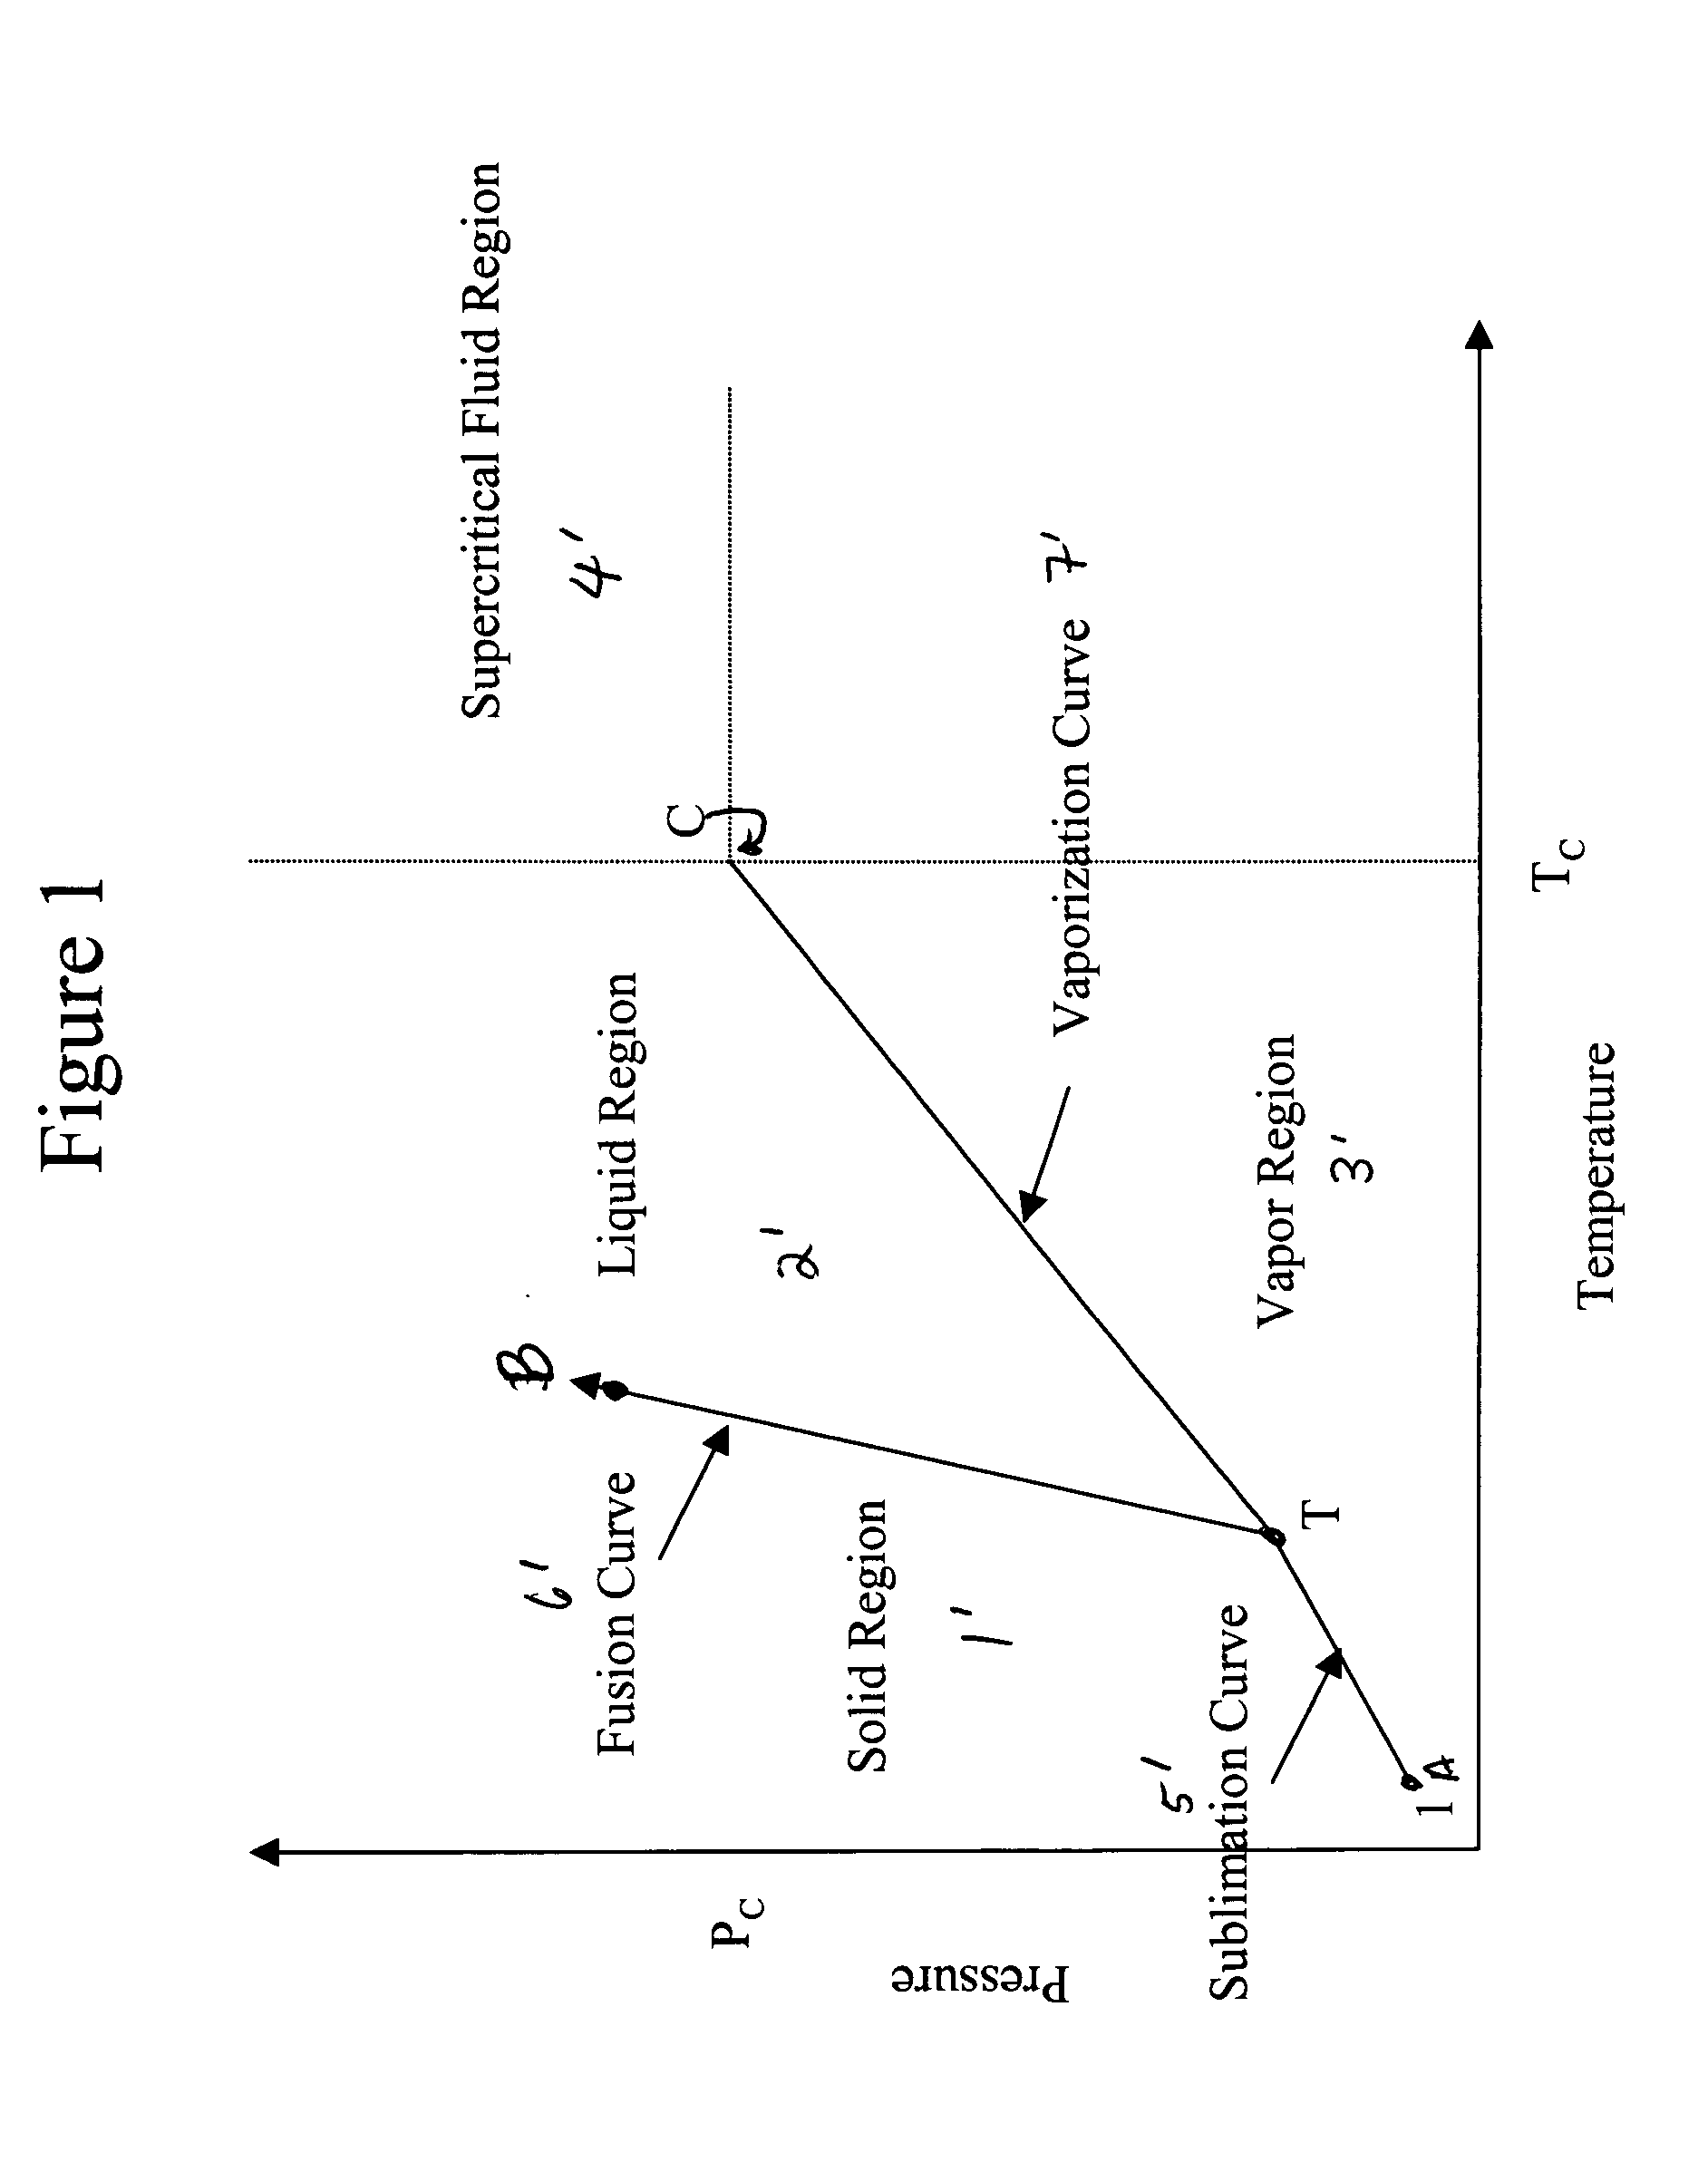 Processing of semiconductor substrates with dense fluids comprising acetylenic diols and/or alcohols